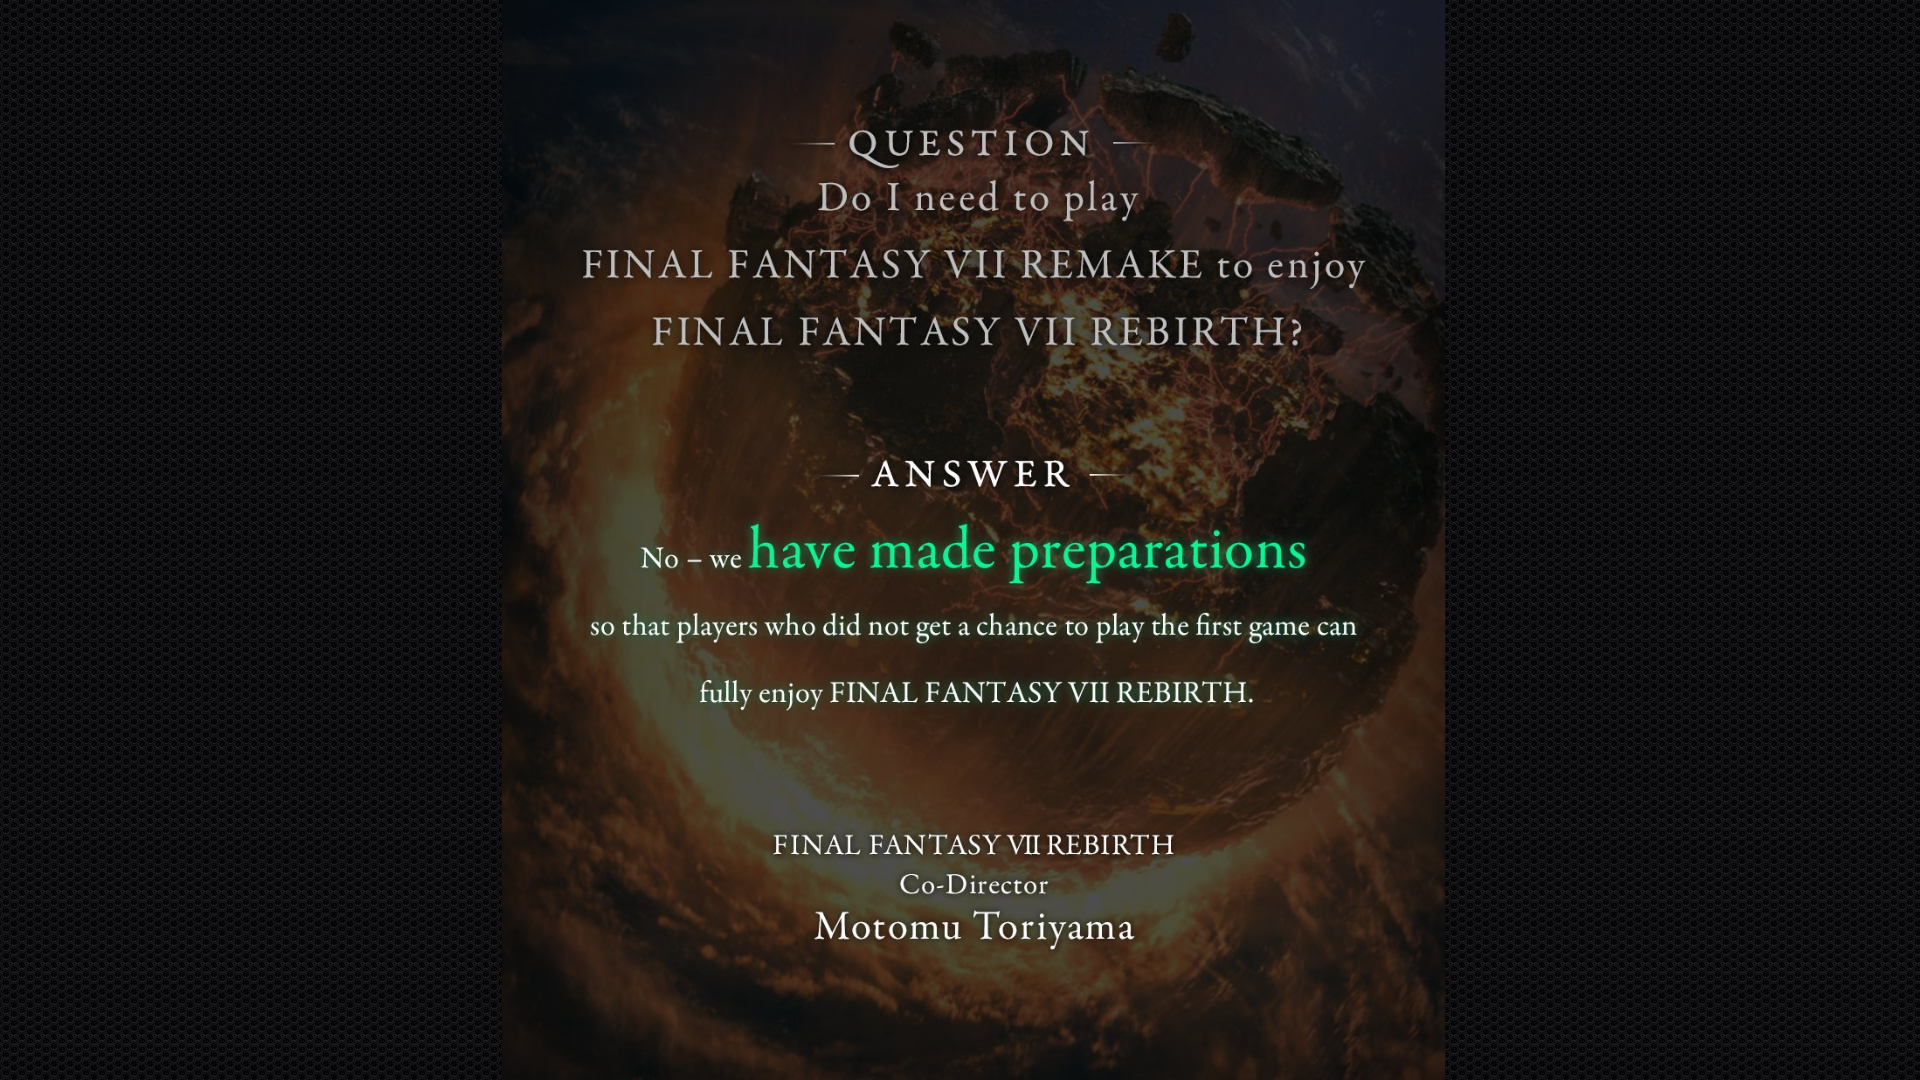 A screenshot of a Tweet taken from Final Fantasy 7's account showcasing the co-director's response to the fan question